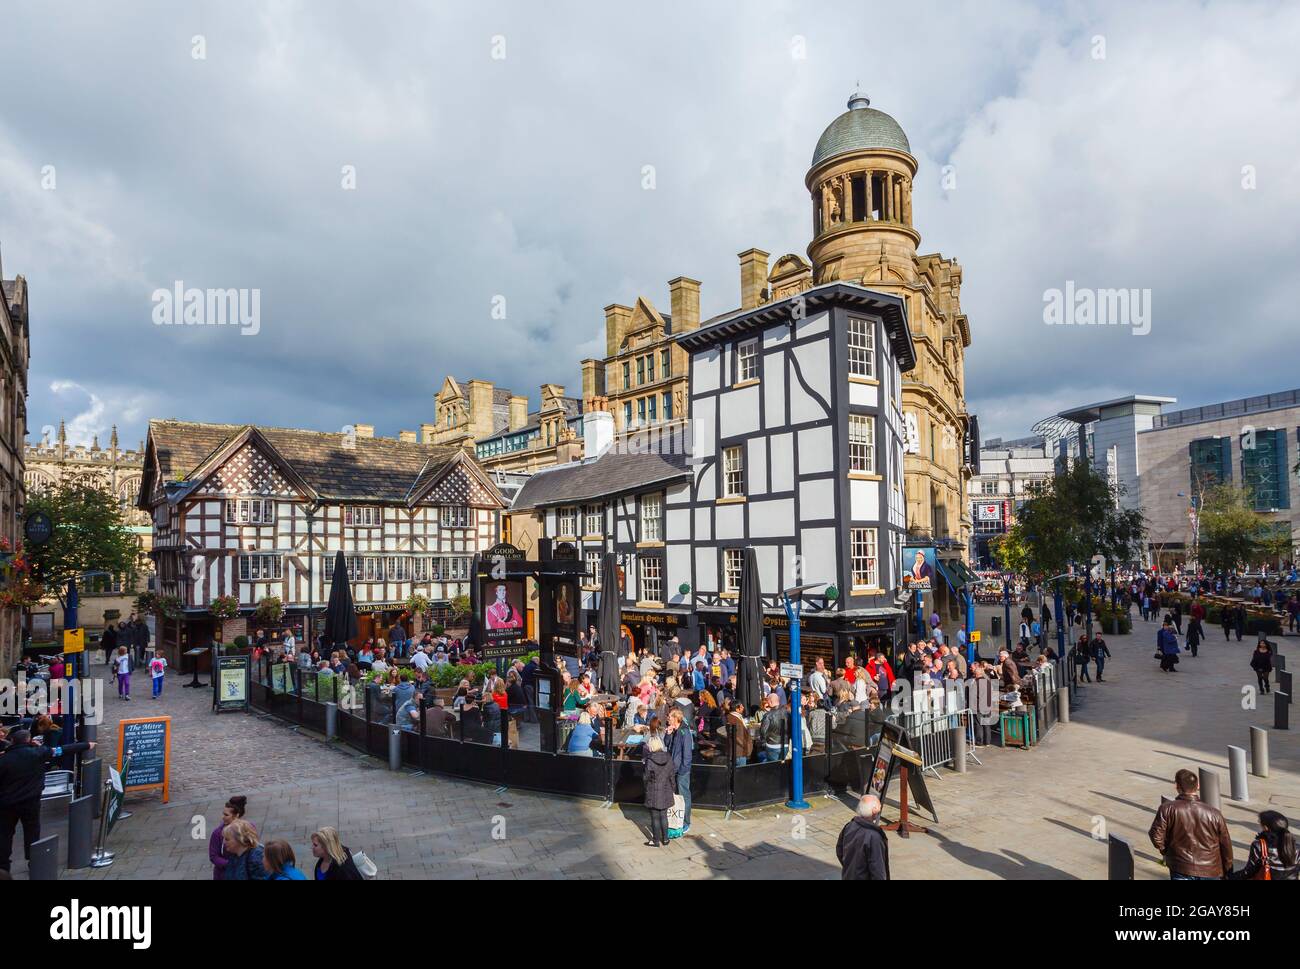 The half-timbered Old Wellington Inn and Sinclair's Oyster Bar in Shambles Square, central Manchester, north-west England, crowded with outdoor diners Stock Photo